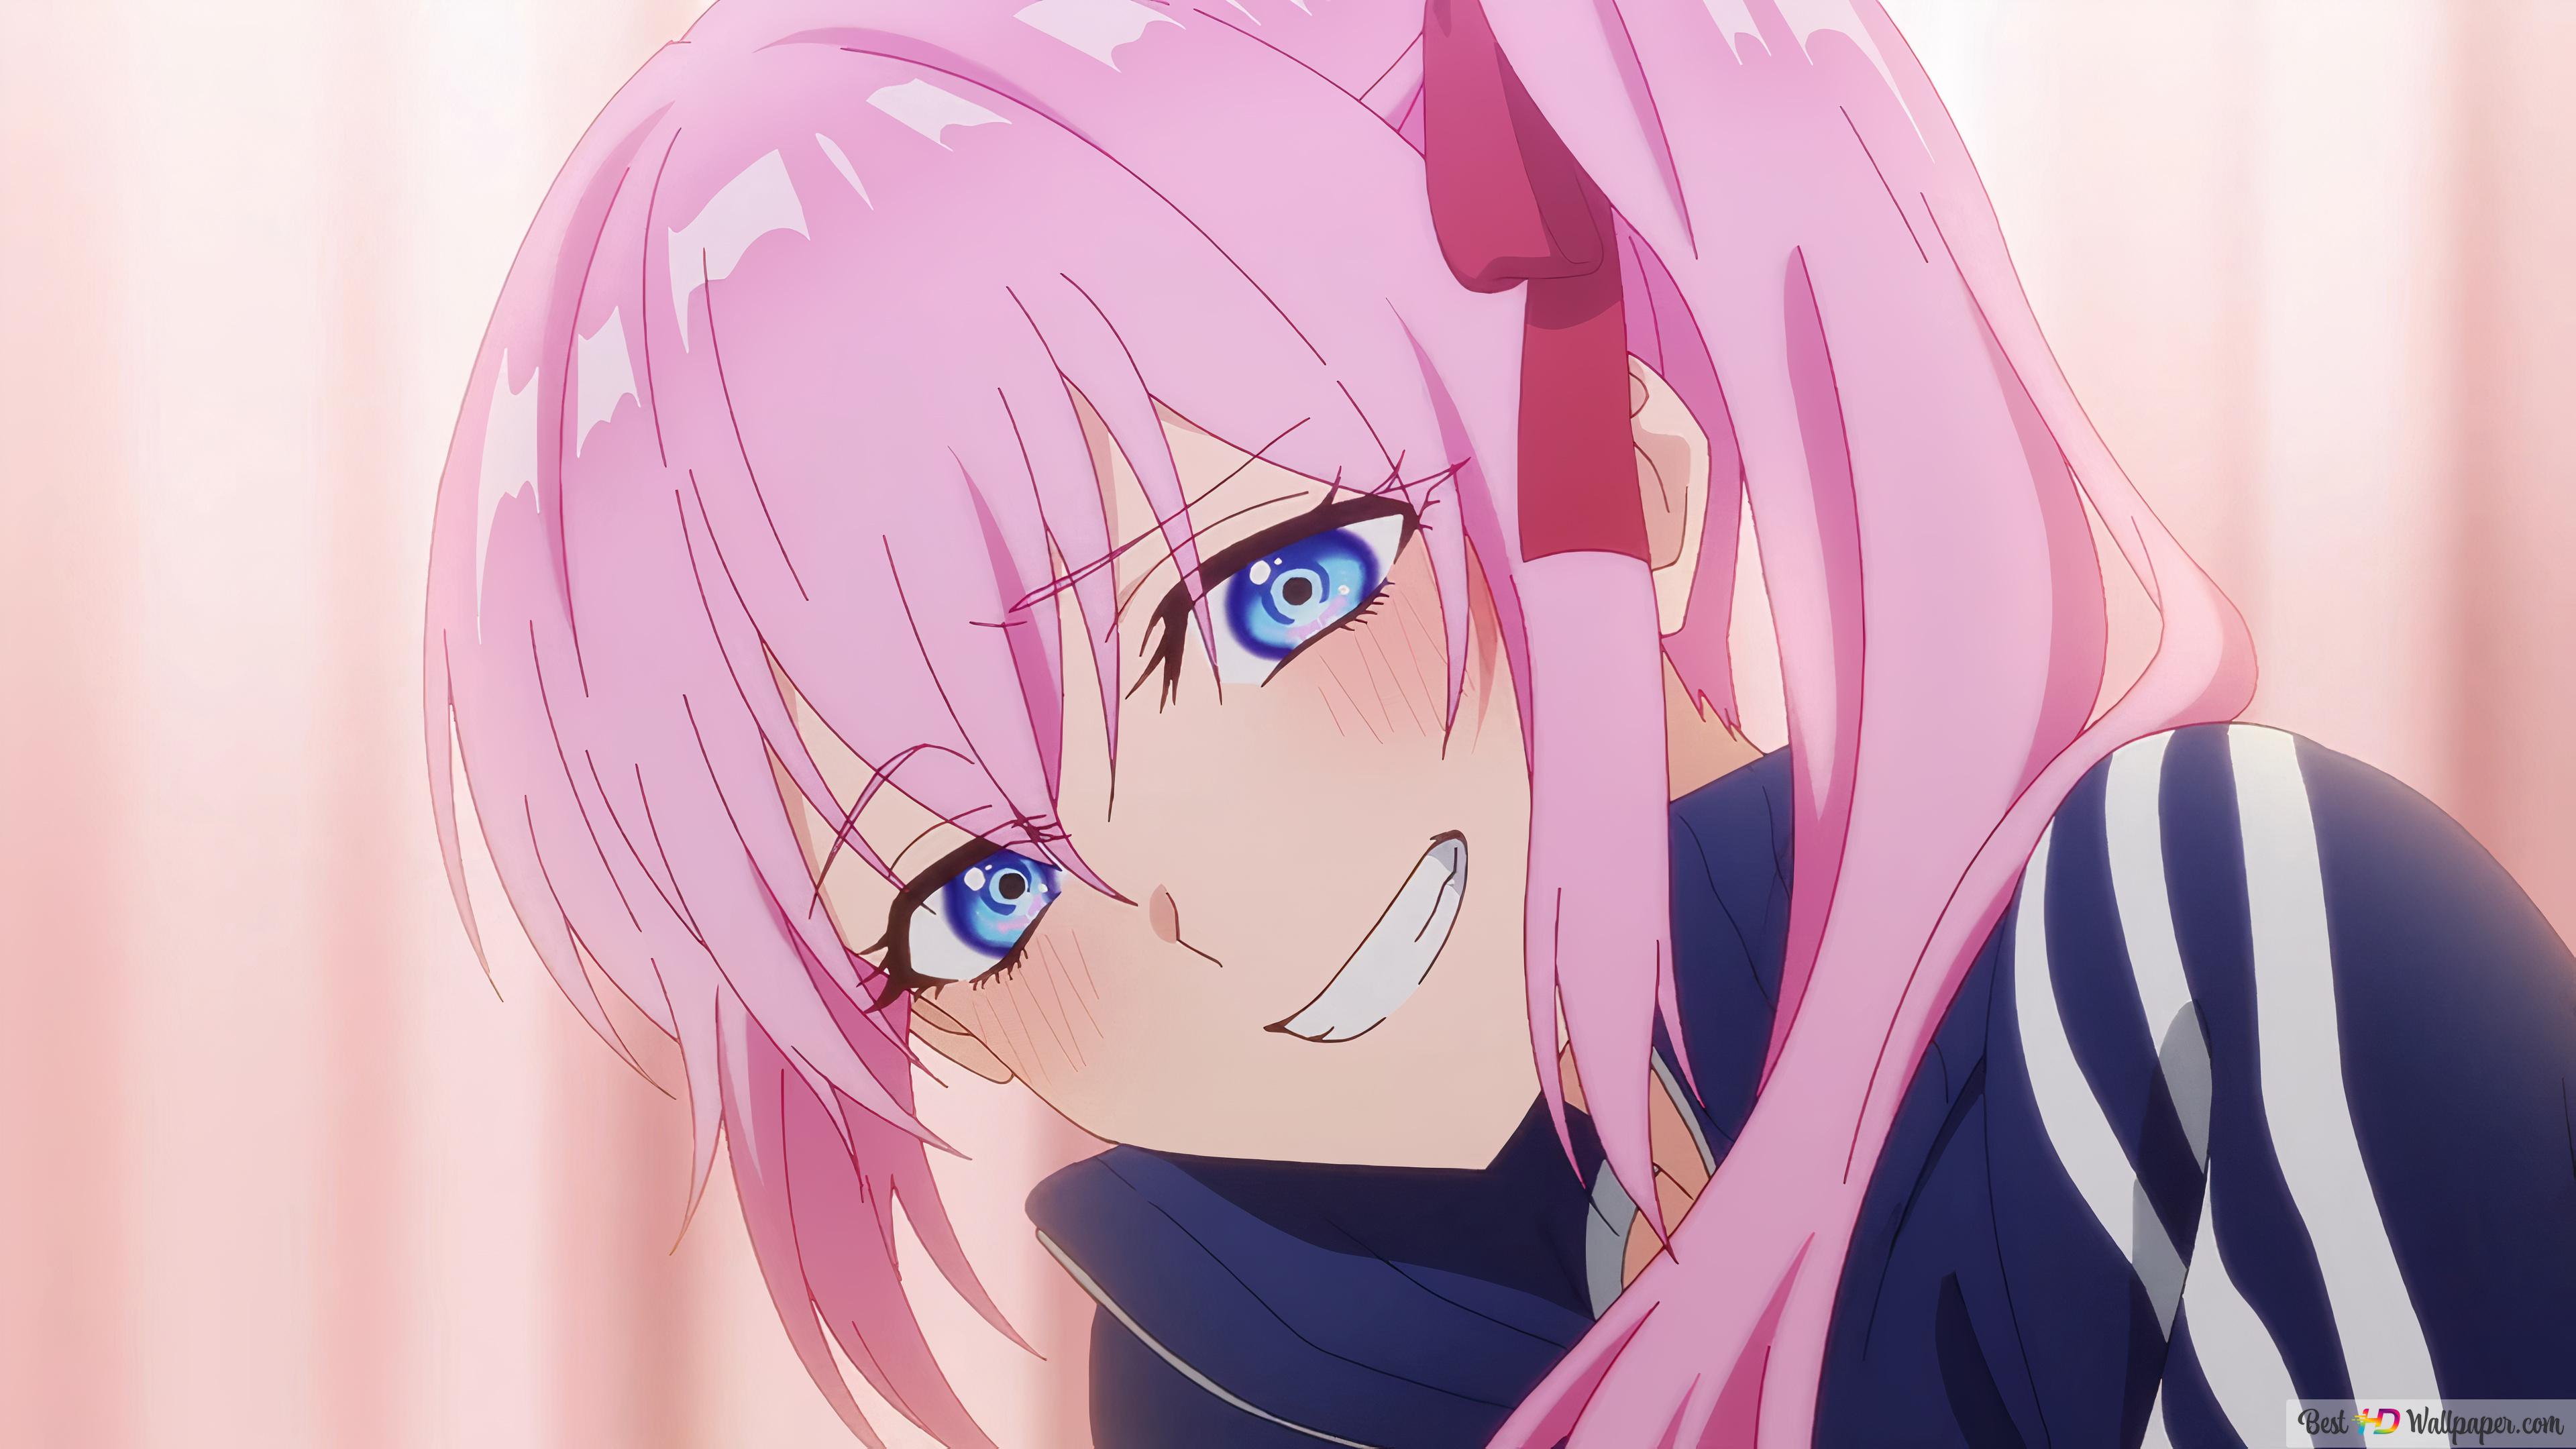 anime girl with pink hair and blue eyes wallpaper